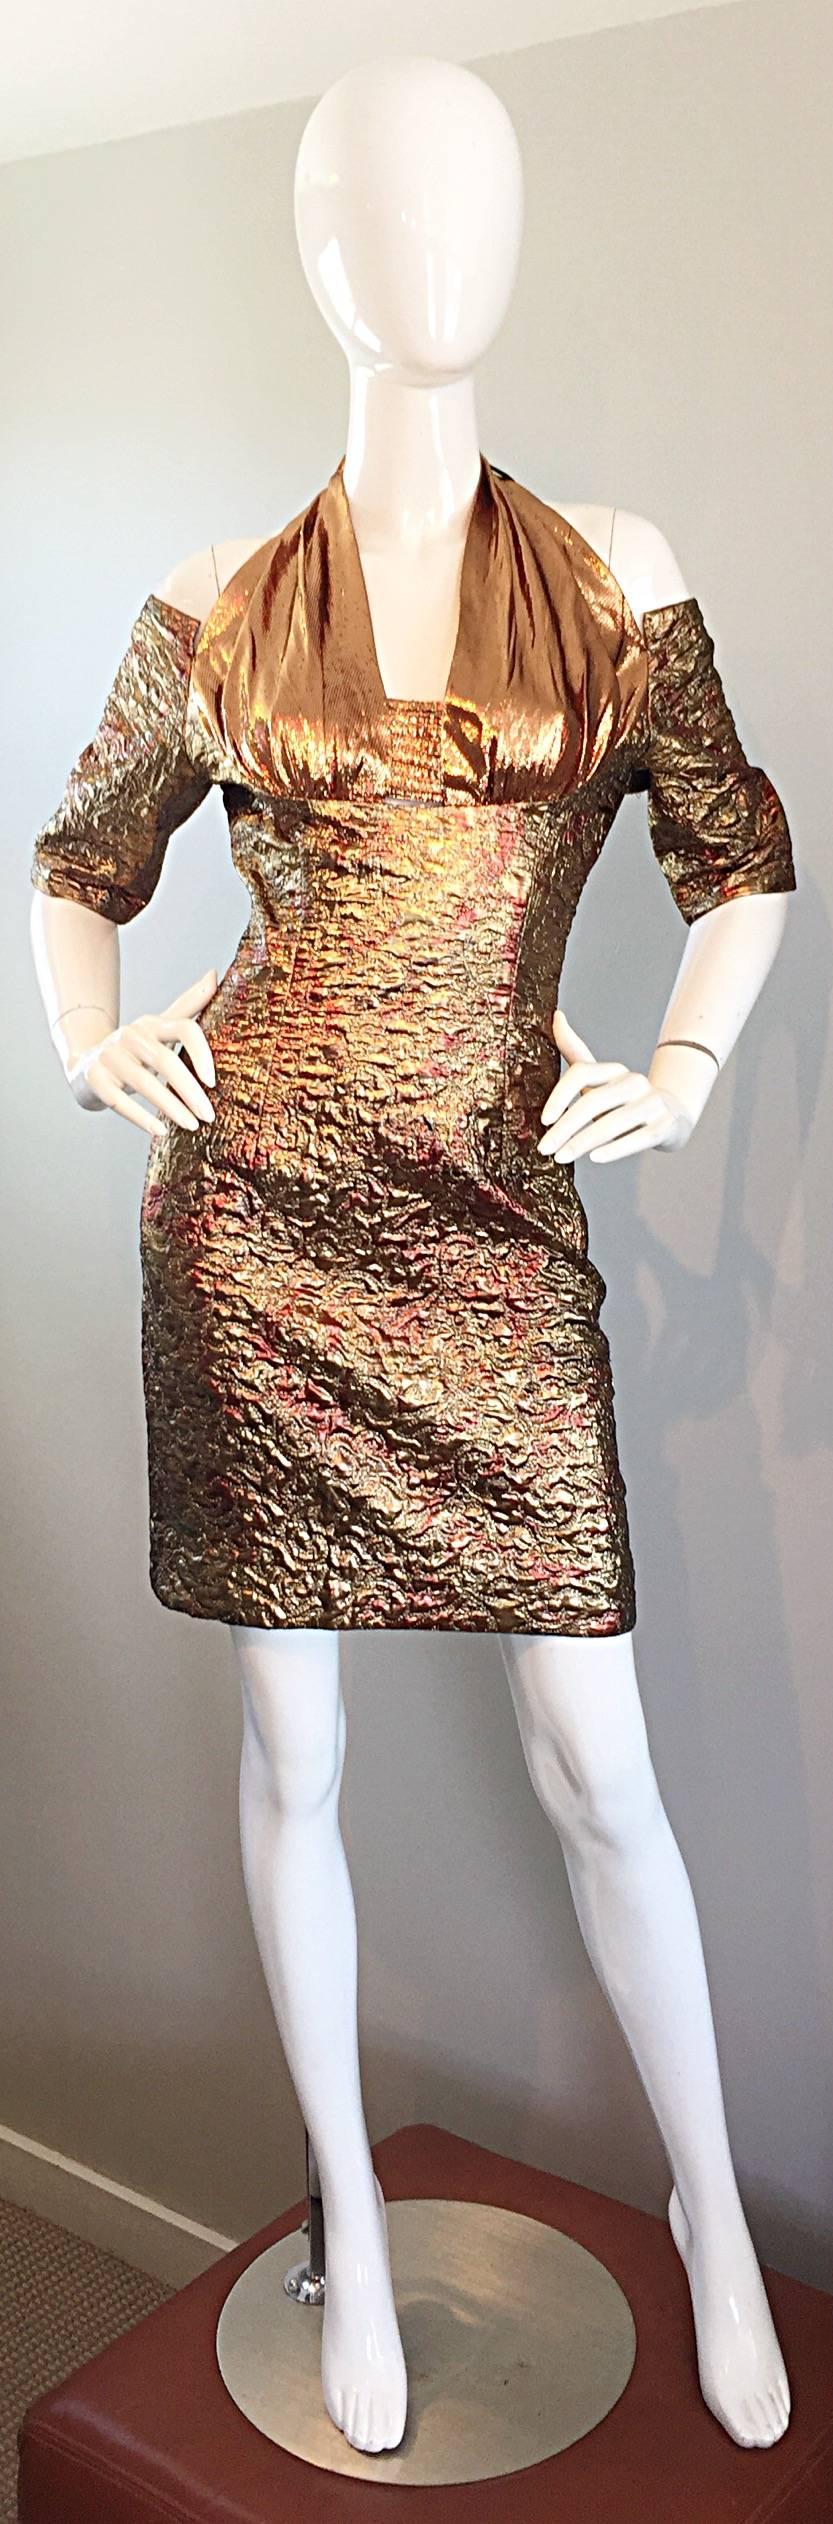 Sexy 90s bronze, gold and rose gold silk brocade bodcon dress! Features silk lame rose gold halter bodice, with a textured silk brocade body. Peek-a-boo shoulders reveal just the right amount of skin. Hidden zipper up the back, and button closure at